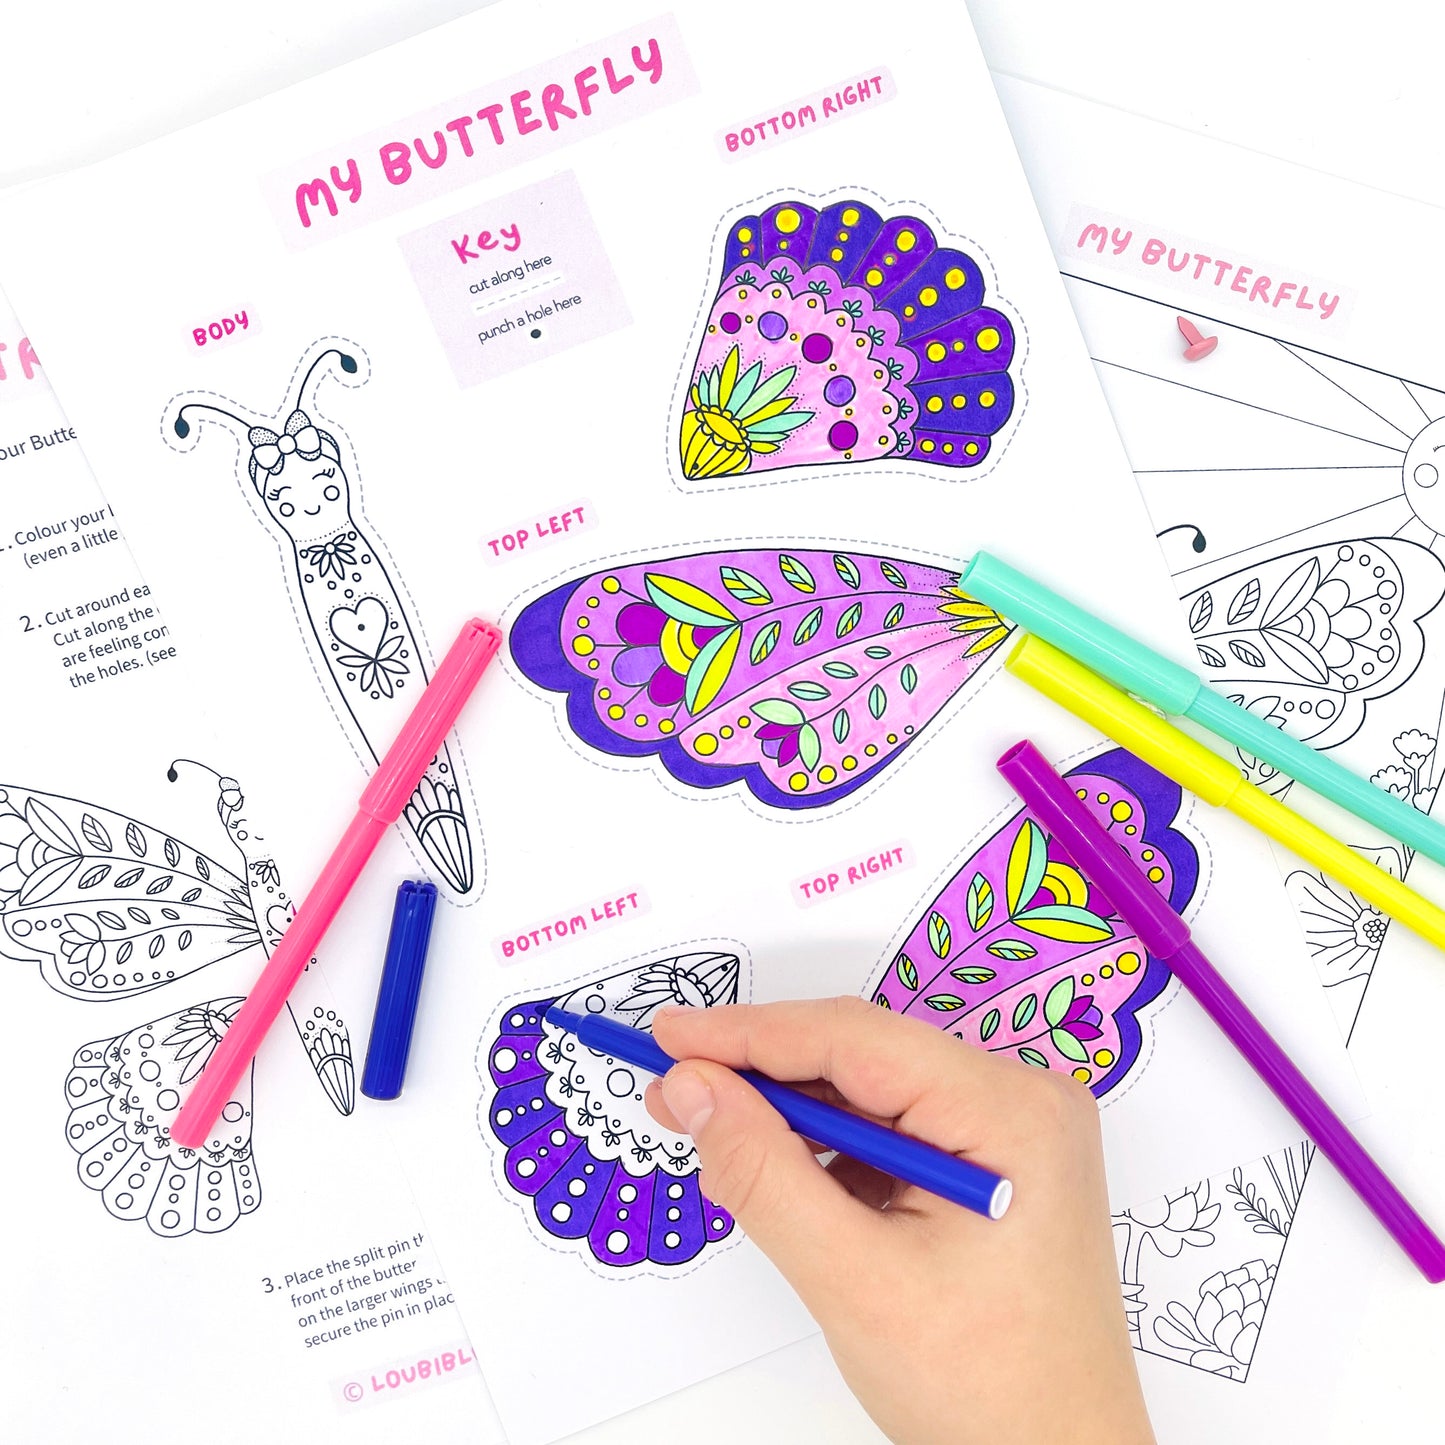 colouring a kids downloadable butterfly craft